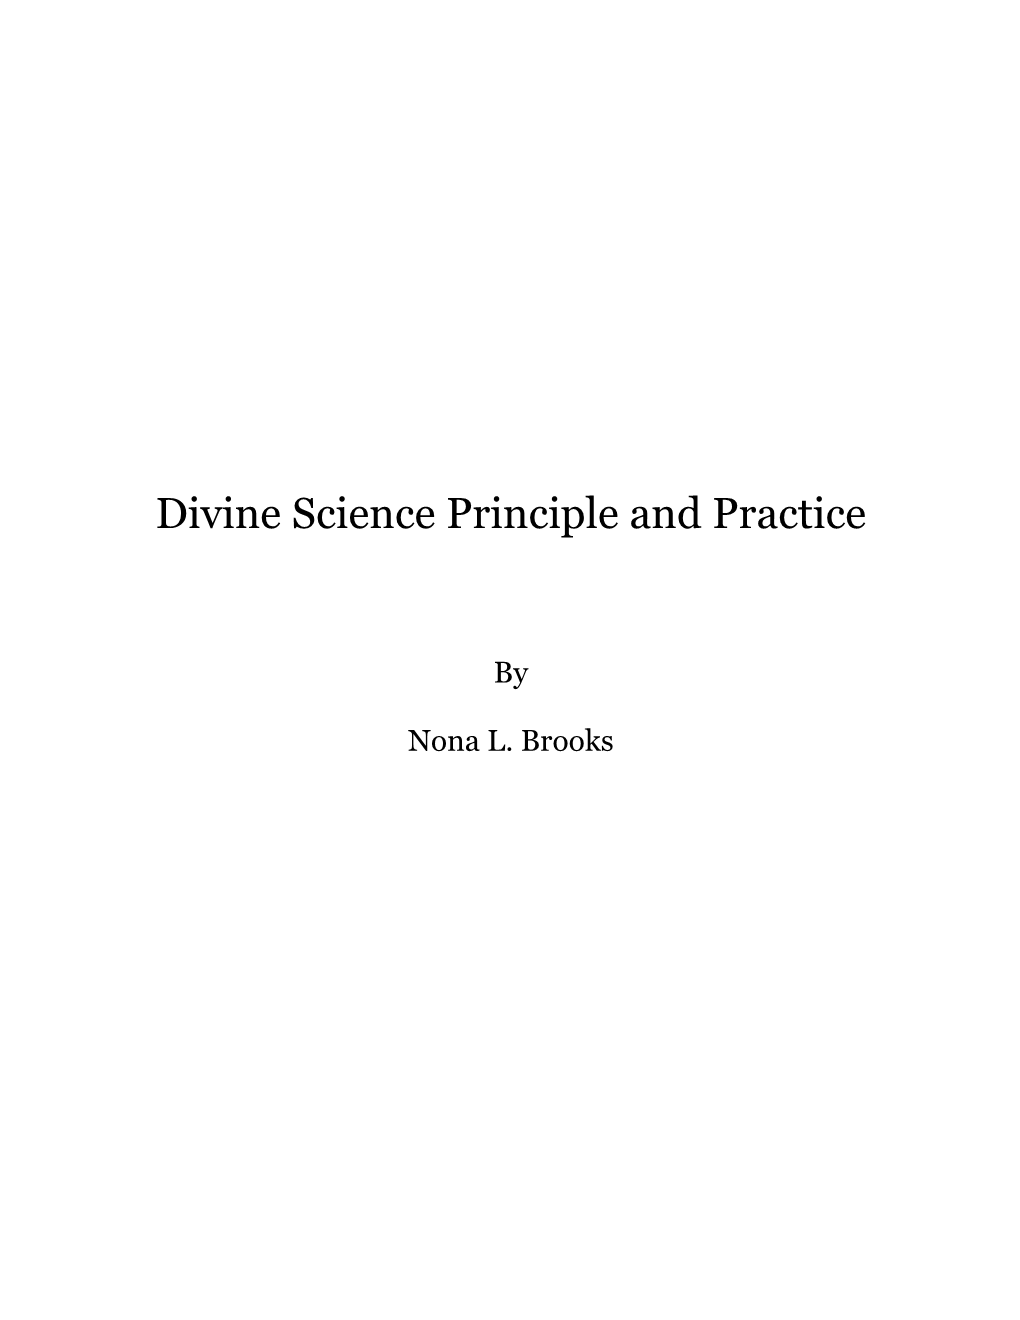 Divine Science Principle and Practice